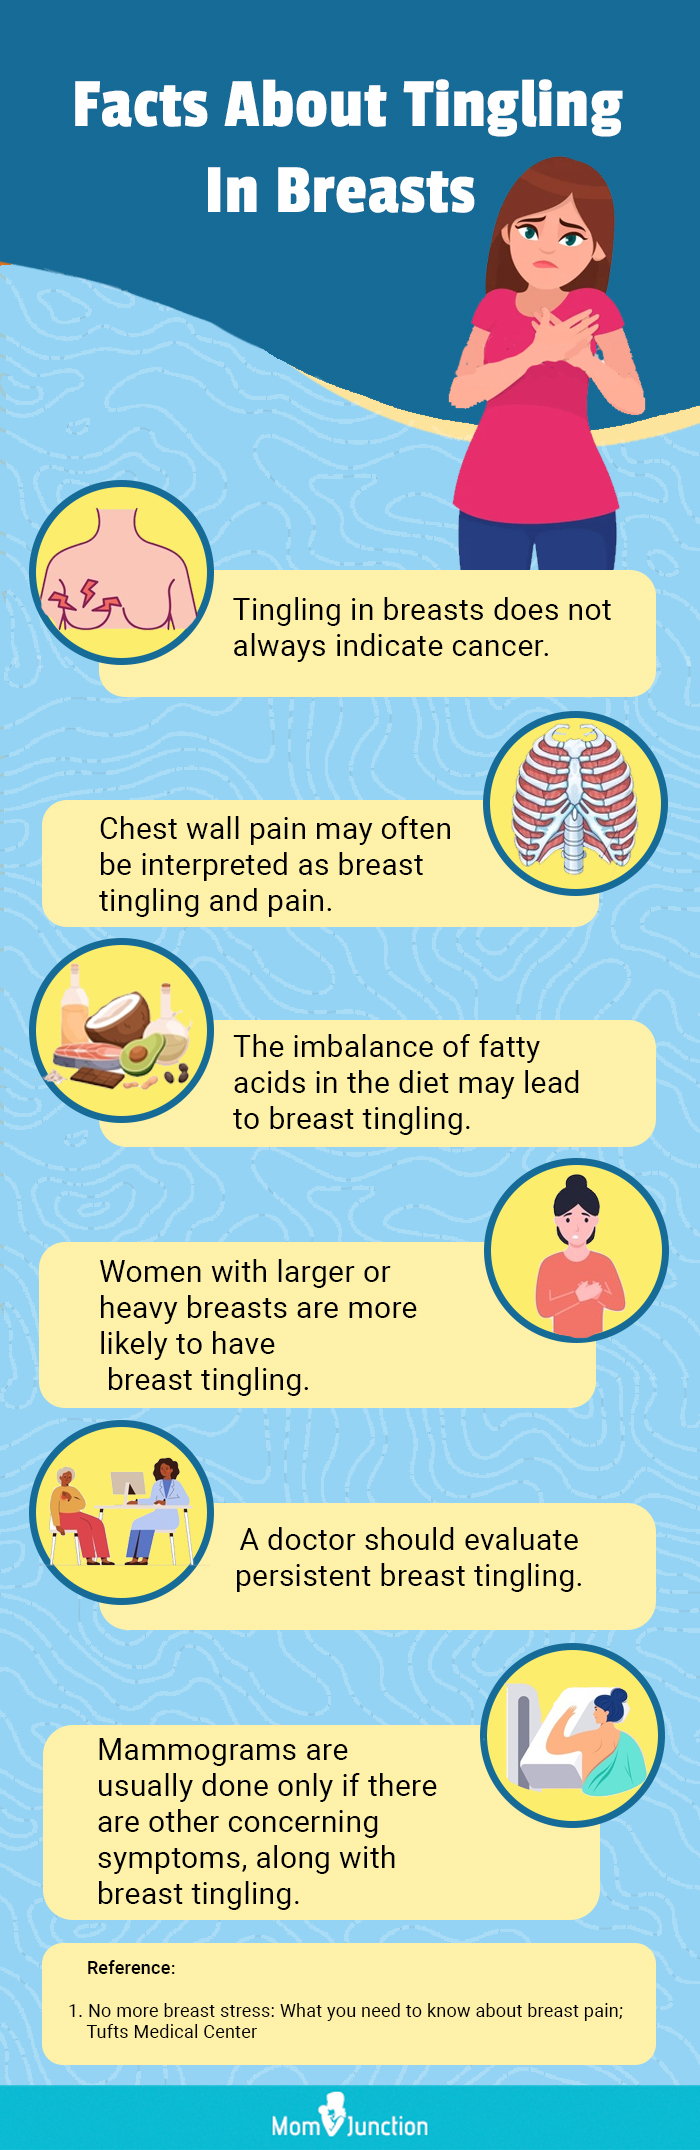 facts about tingling in breasts (infographic)